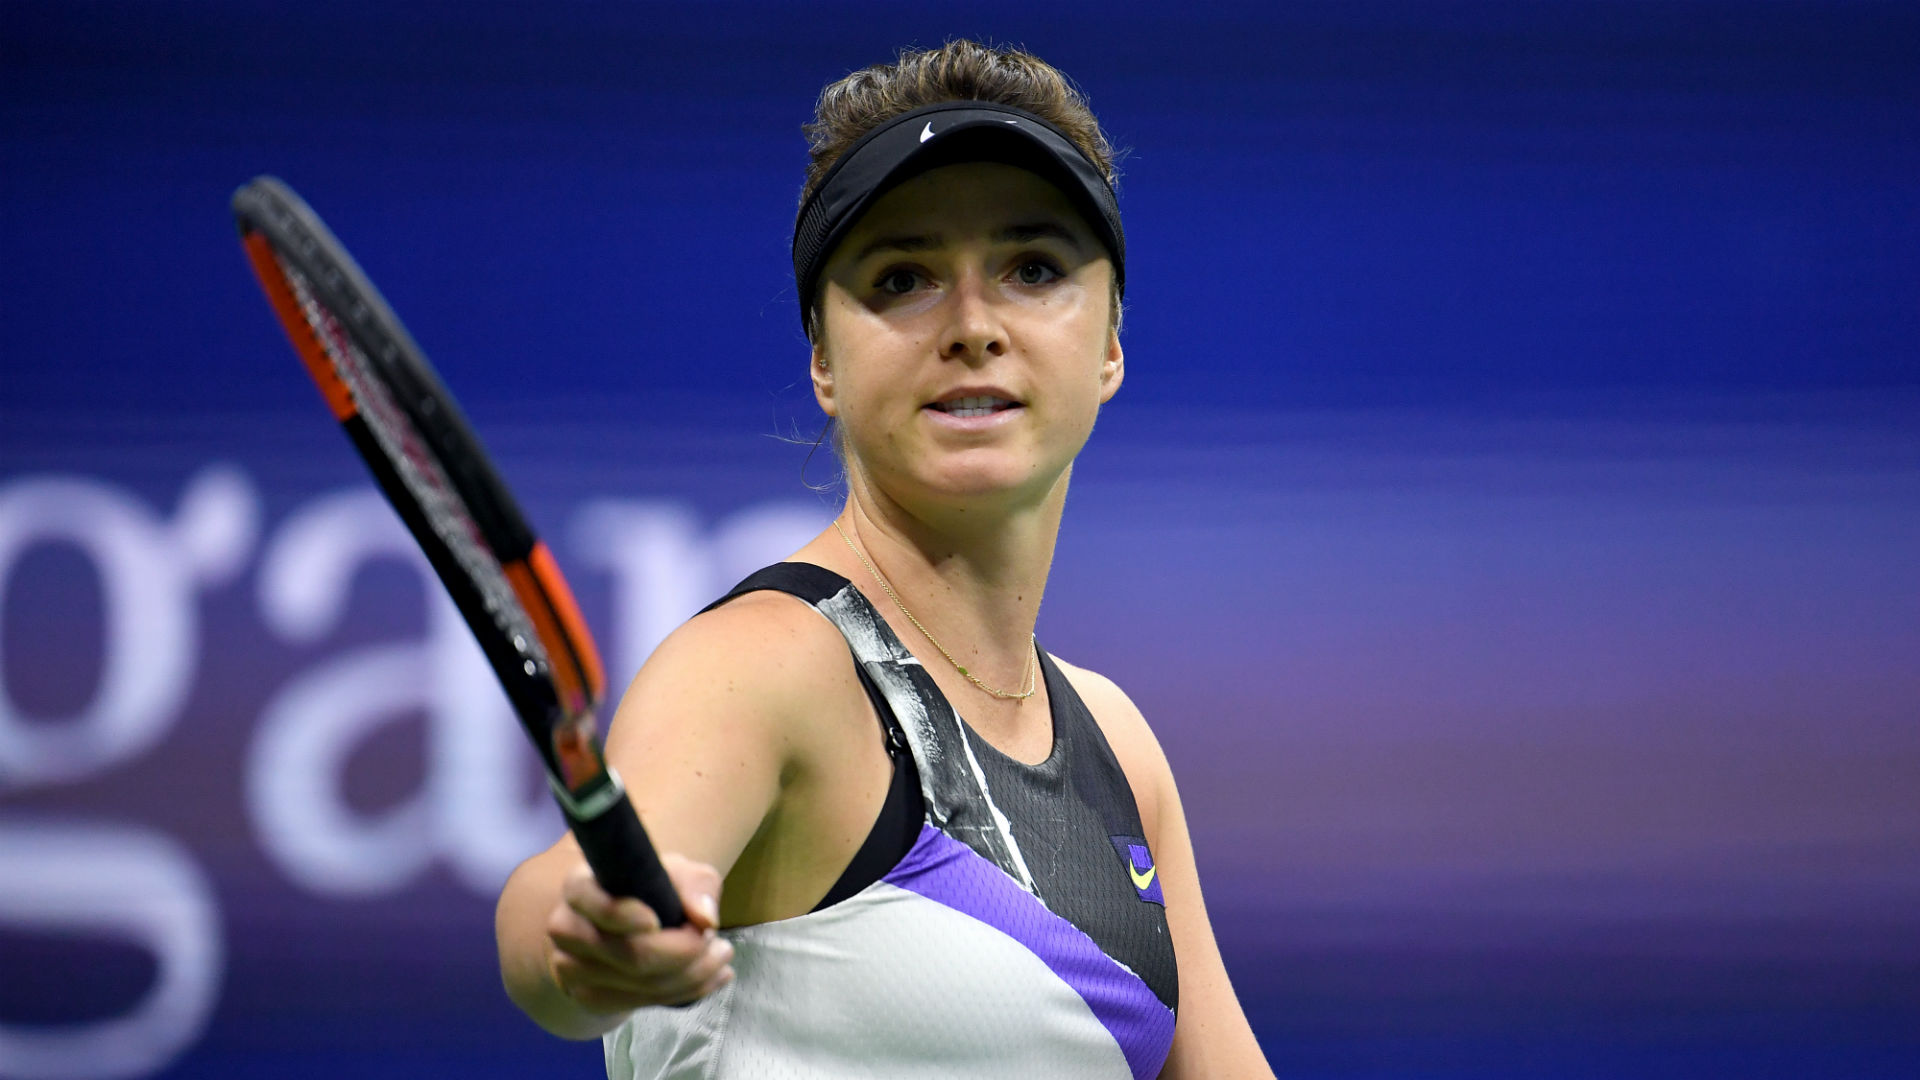 Wang Qiang succumbed to a first-round loss against Shuai Peng, but Elina Svitolina coasted through at the Guangzhou Open.